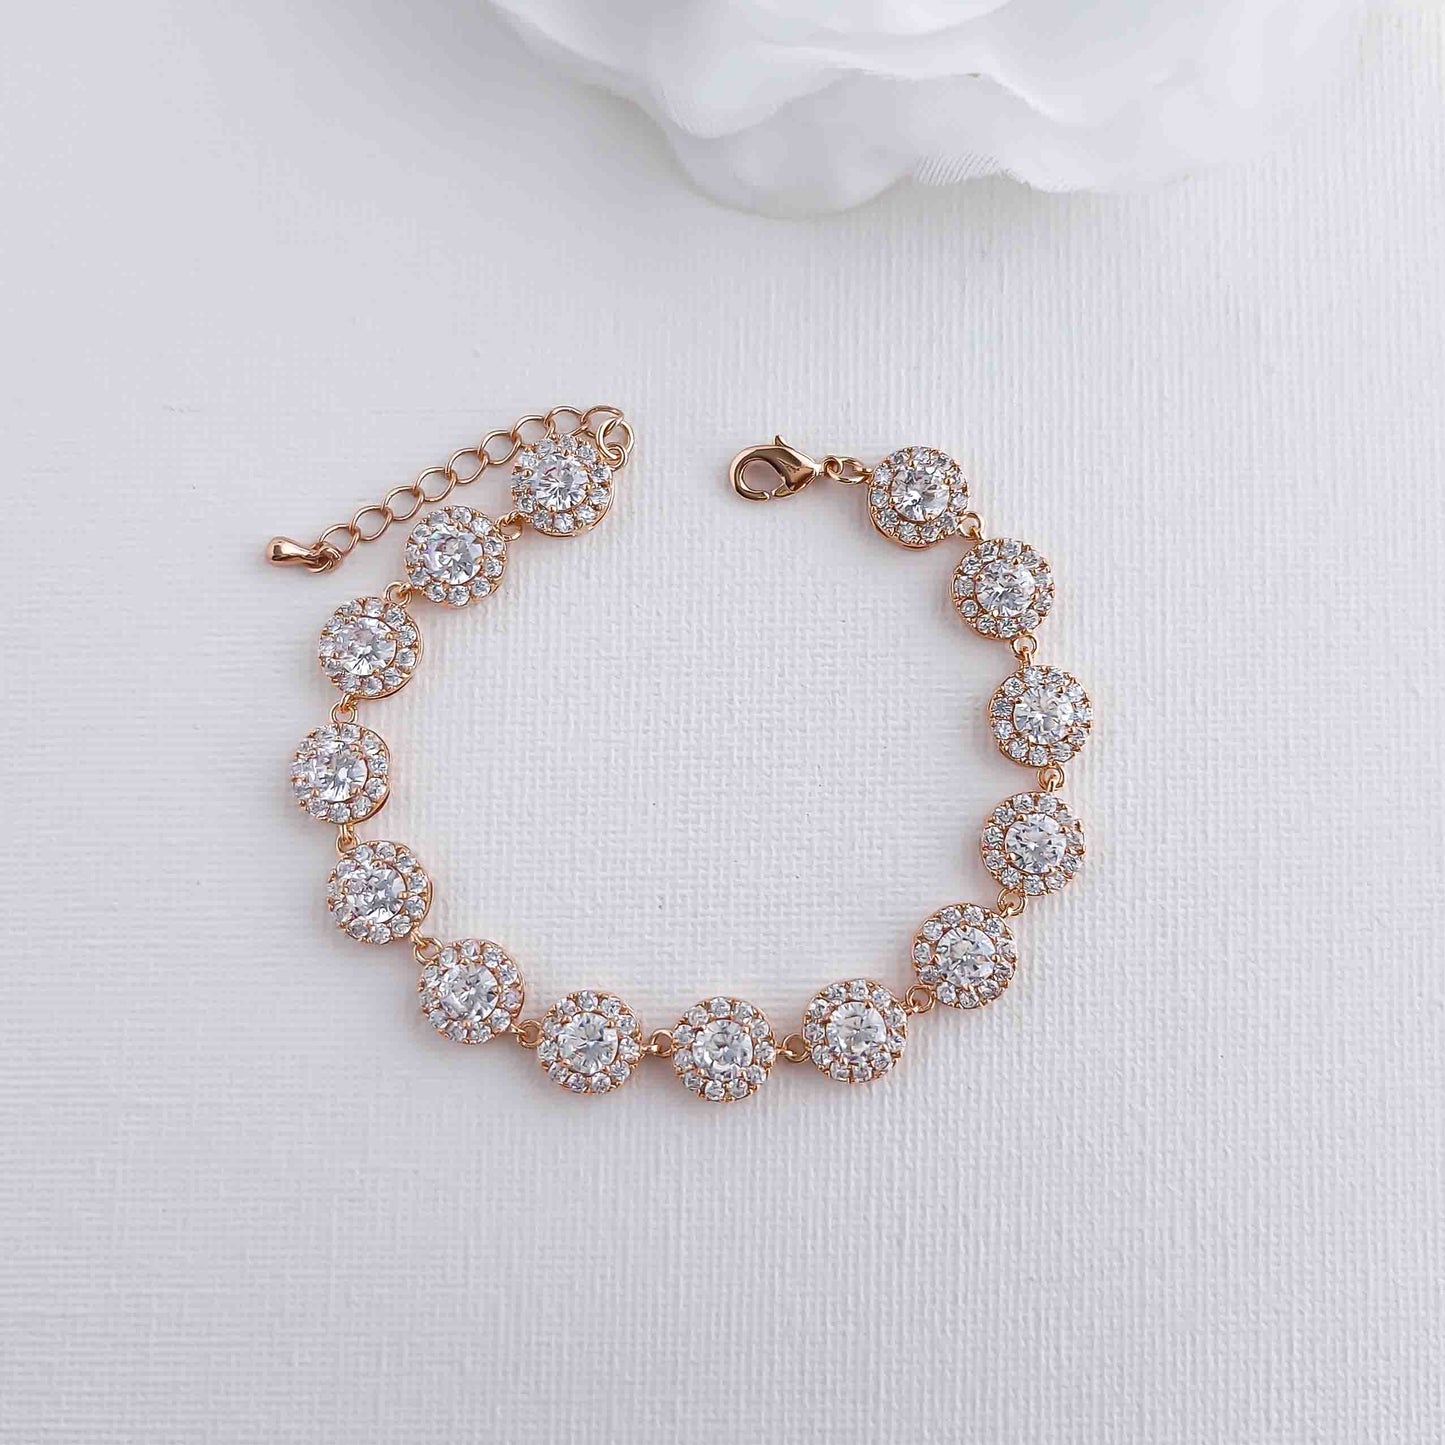 Gold Bridal Bracelet for Weddings in Round Cubic Zirconia -Cristle